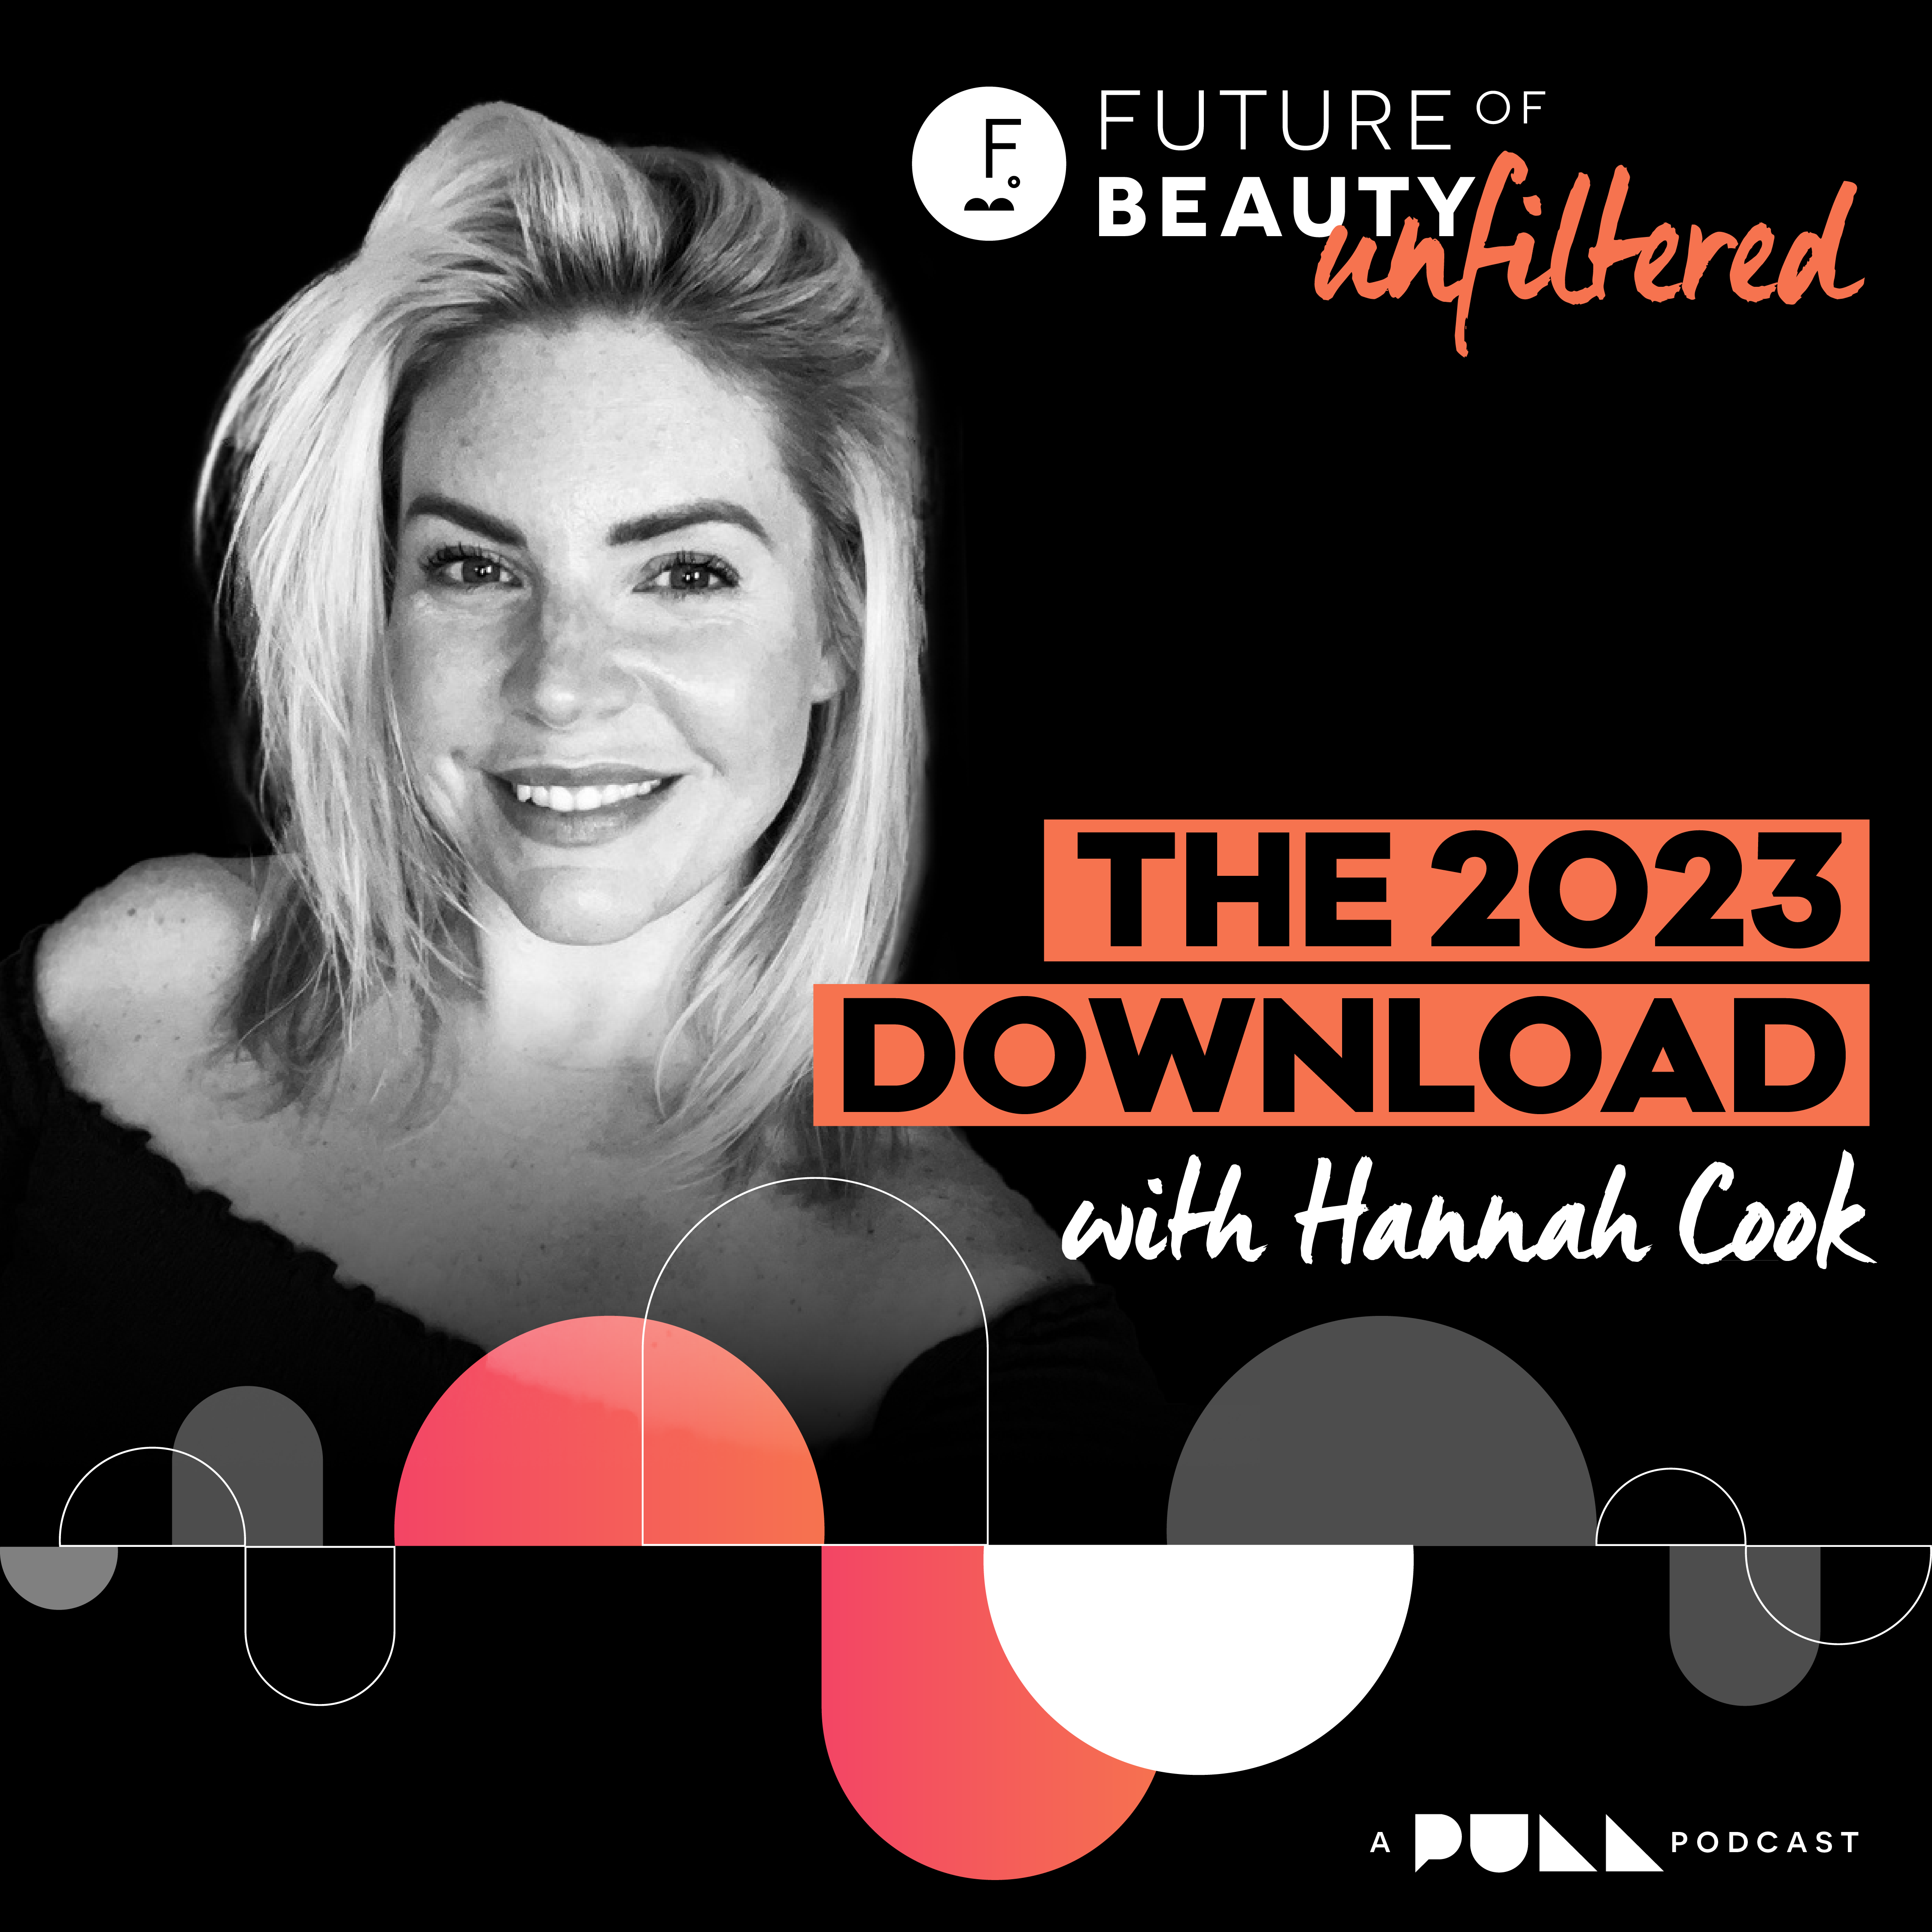 2023 Download: The trends in health & beauty to reflect on